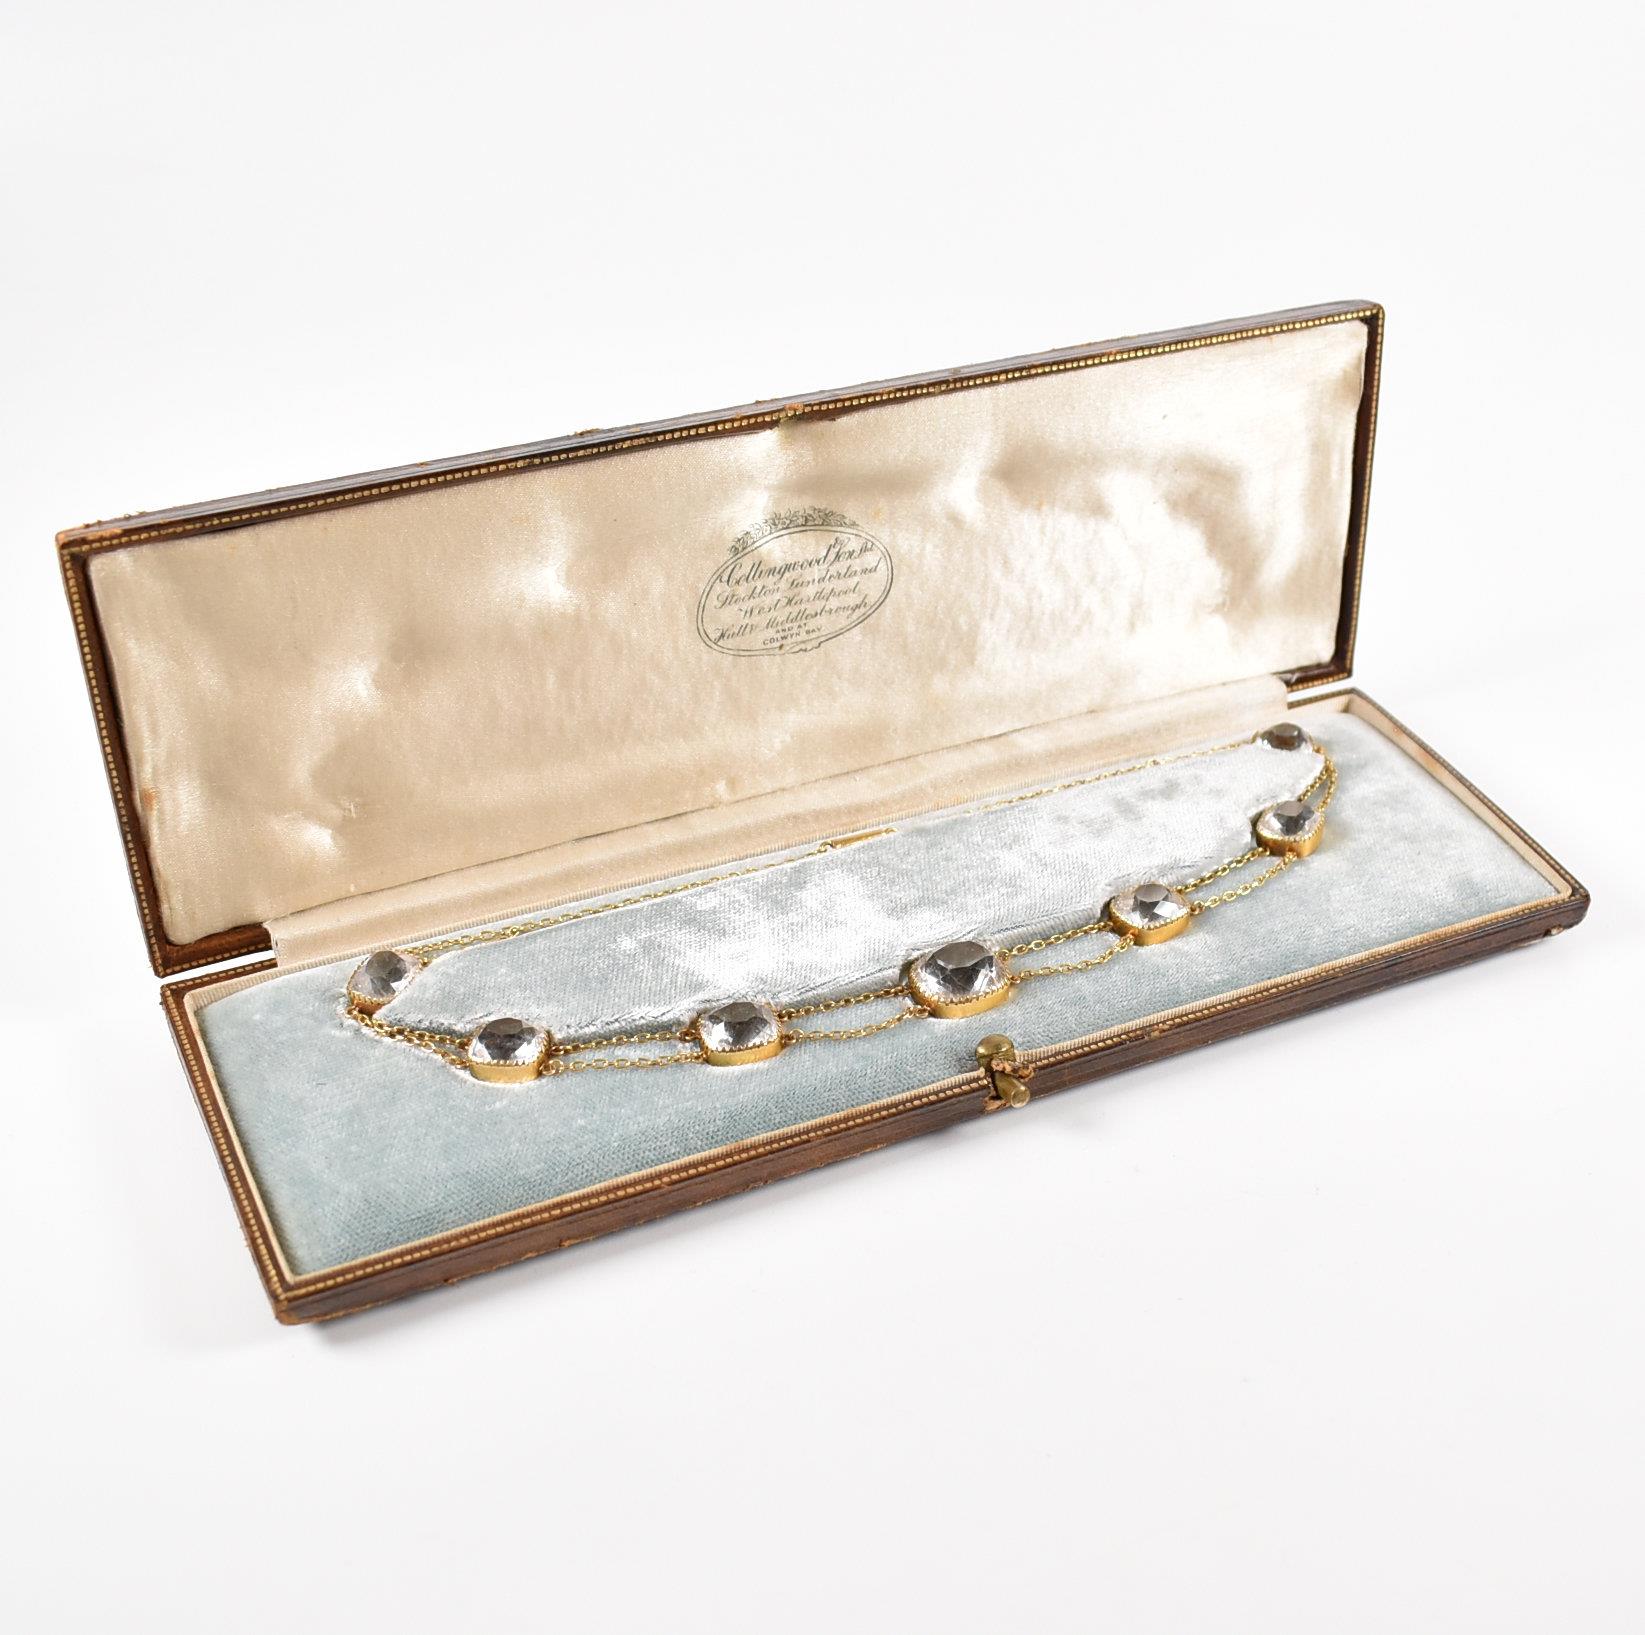 CASED 19TH CENTURY ROCK CRYSTAL RIVIERE NECKLACE - Image 11 of 12